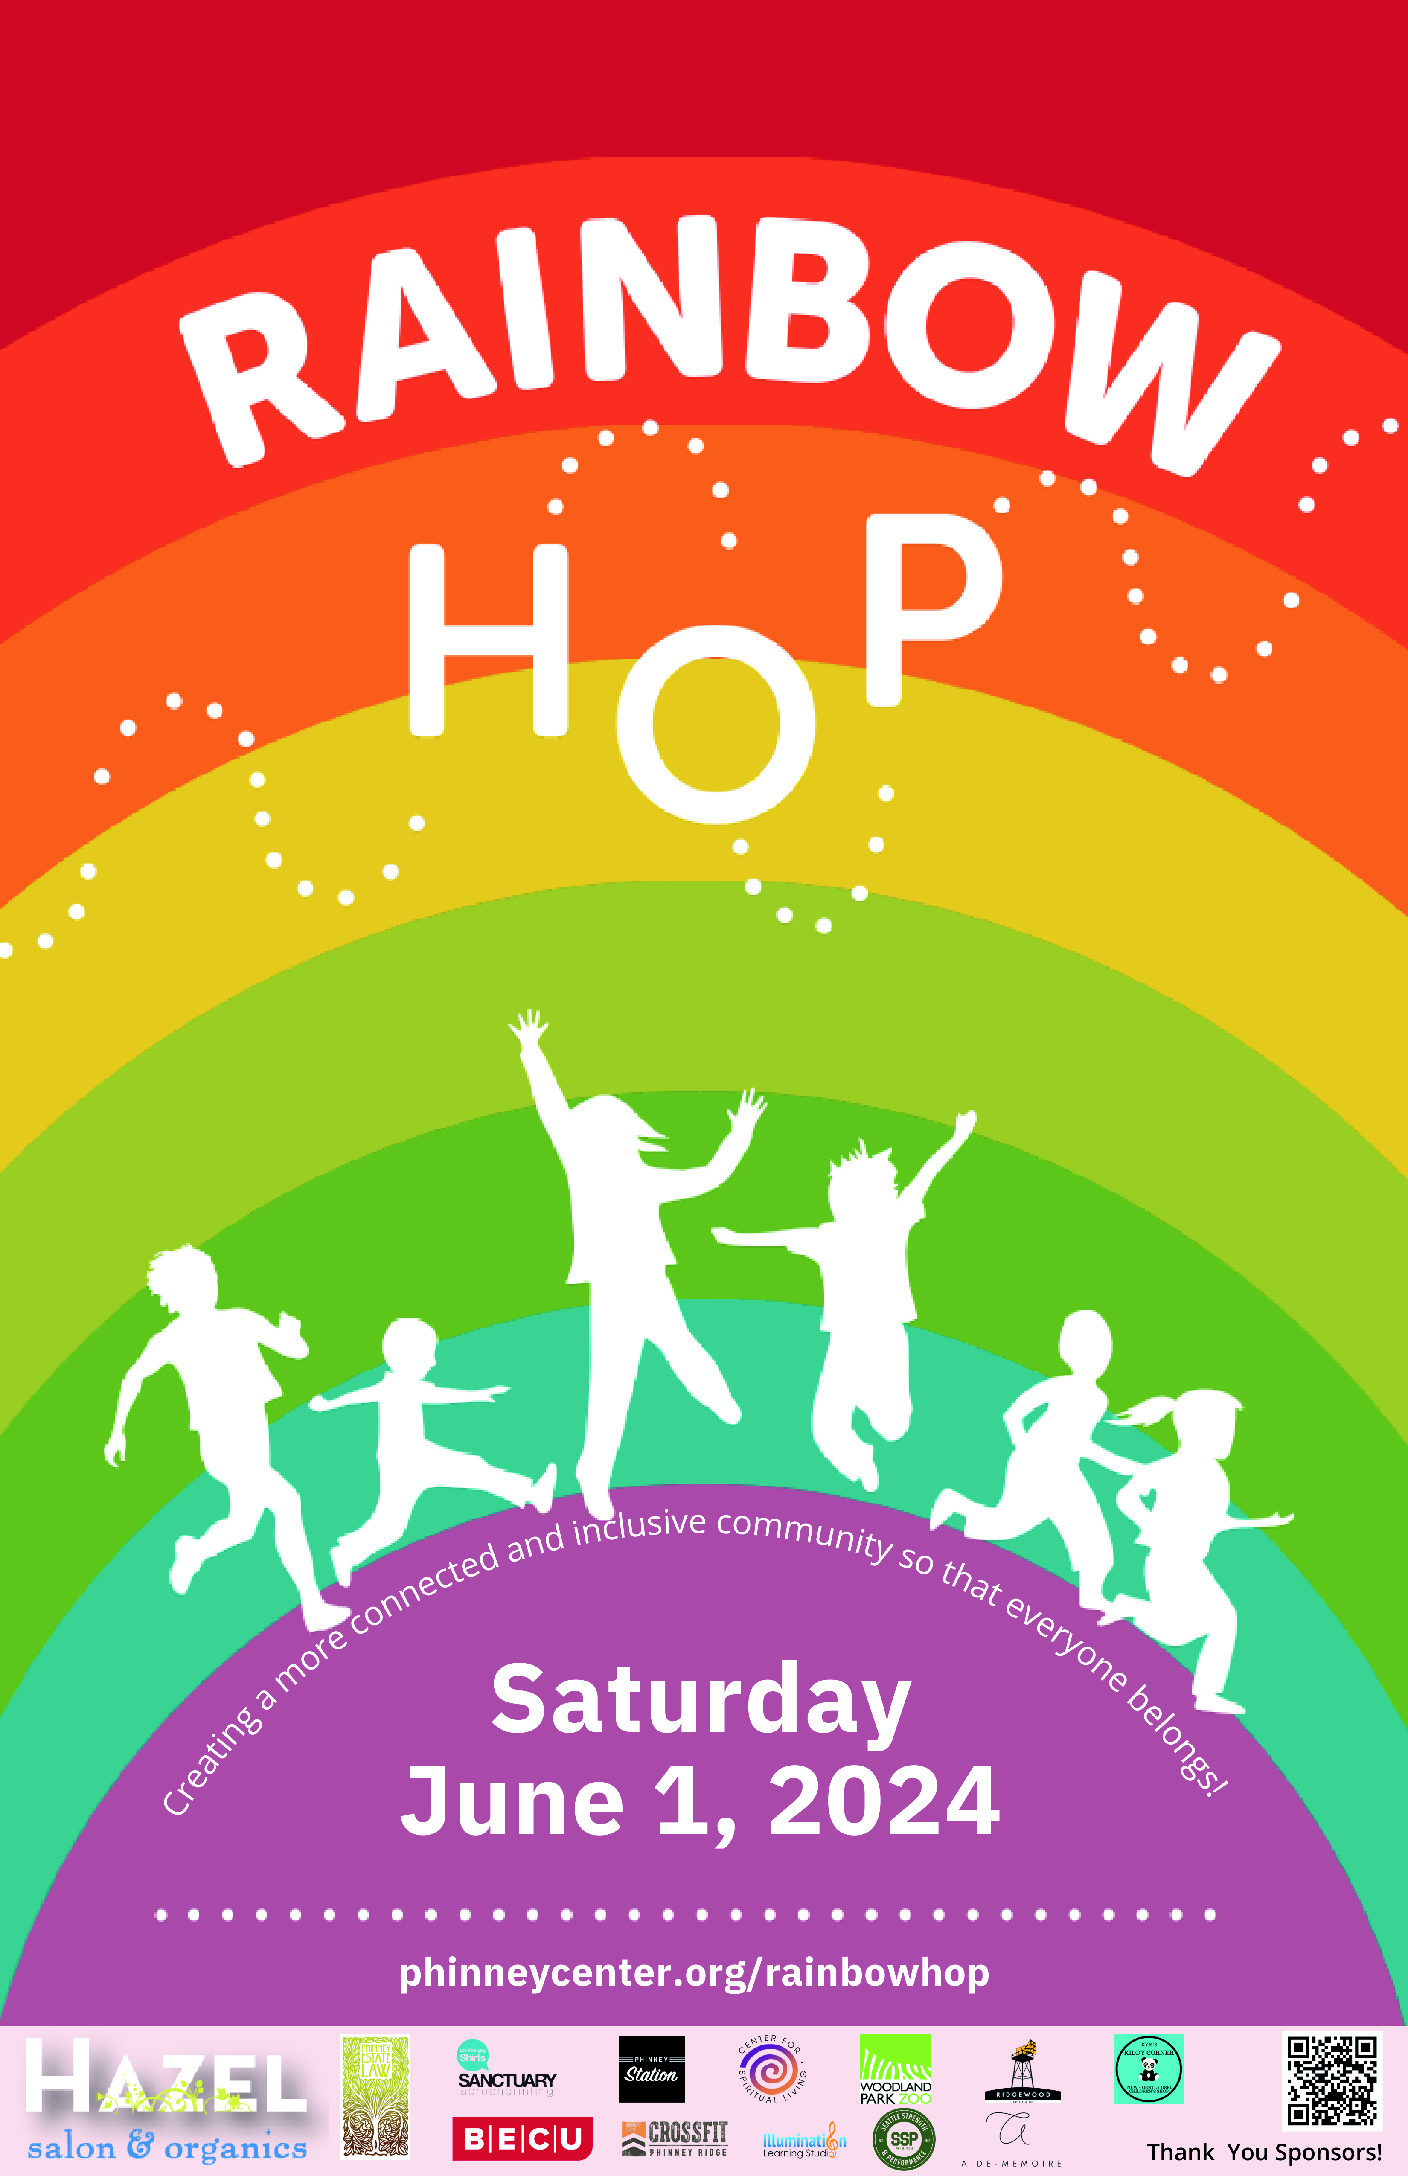 Some tickets left for free play at tomorrow’s Rainbow Hop